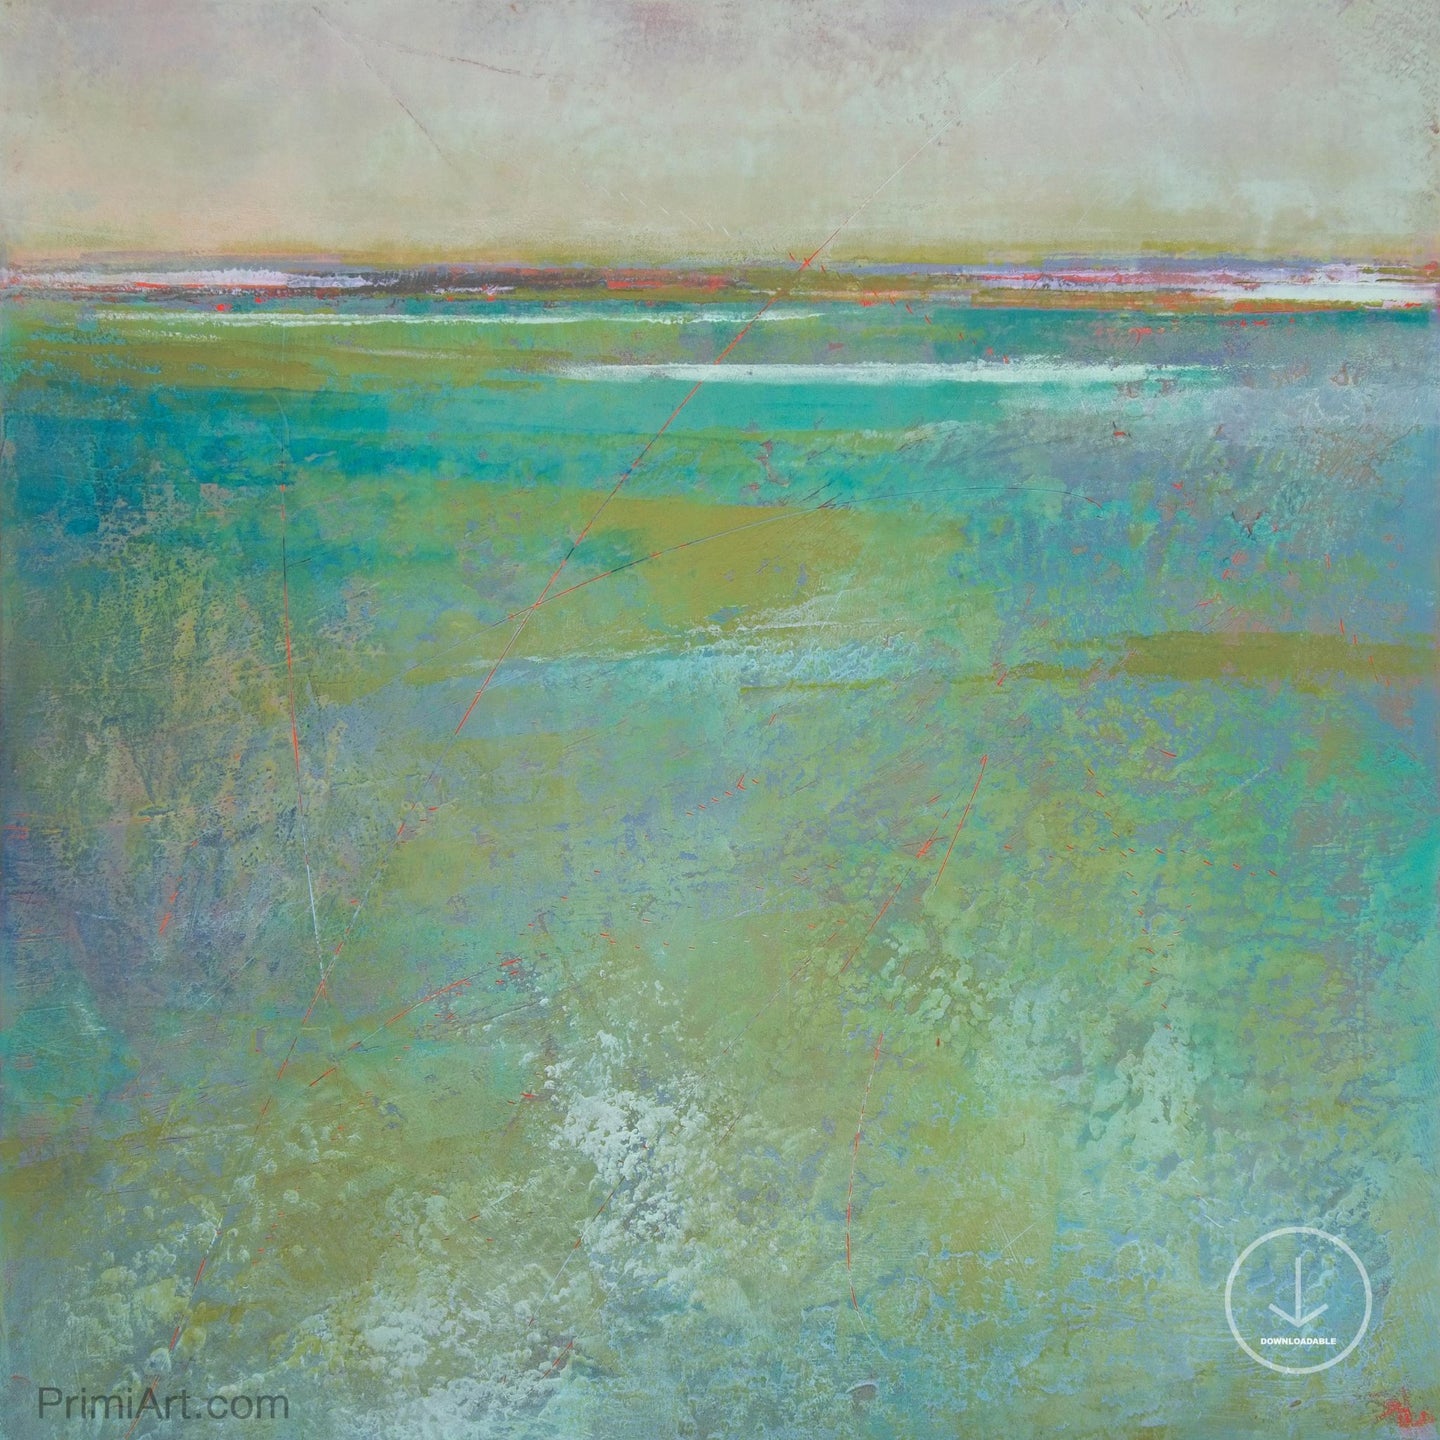 Teal green abstract beach painting 